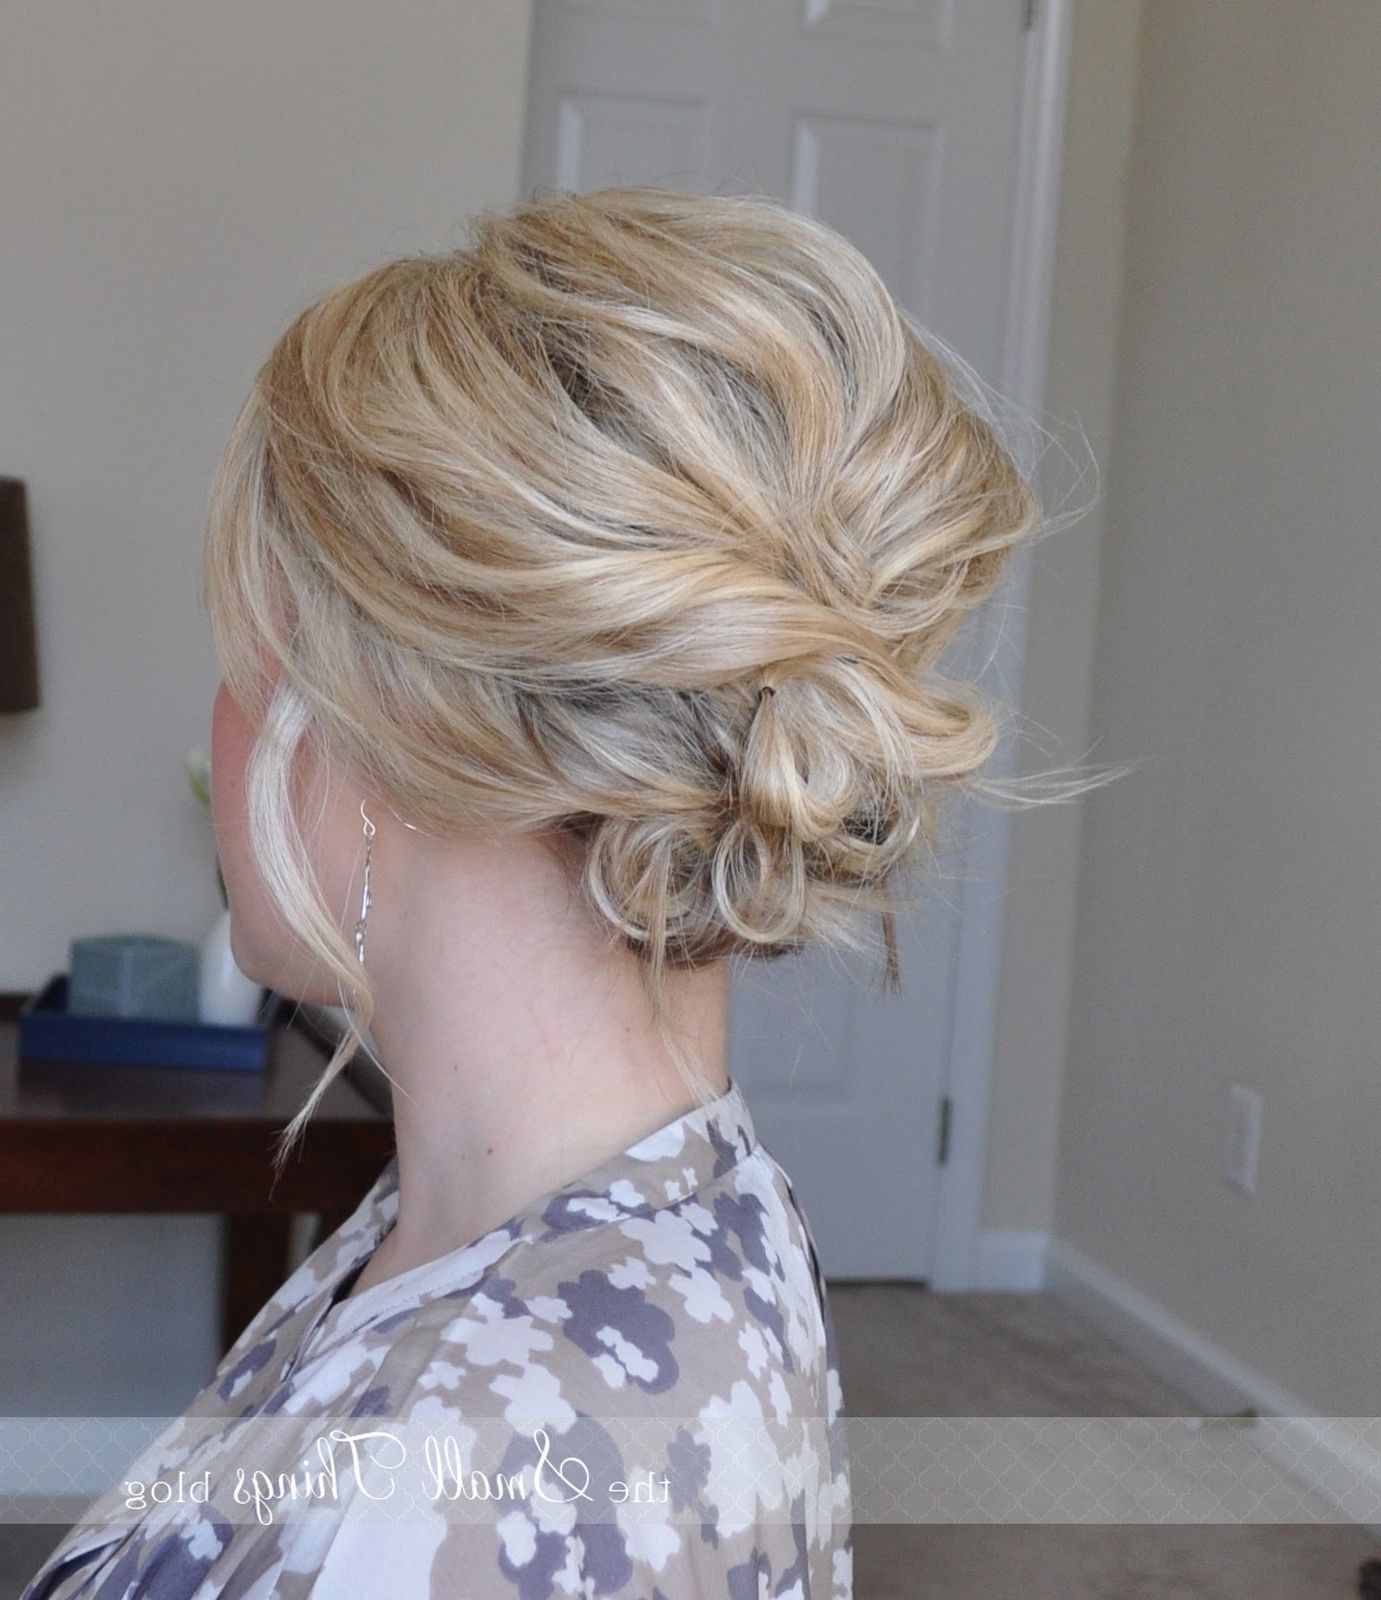 Most Popular Low Messy Chignon Bridal Hairstyles For Short Hair With Regard To The Messy Side Updo – The Small Things Blog (View 15 of 20)